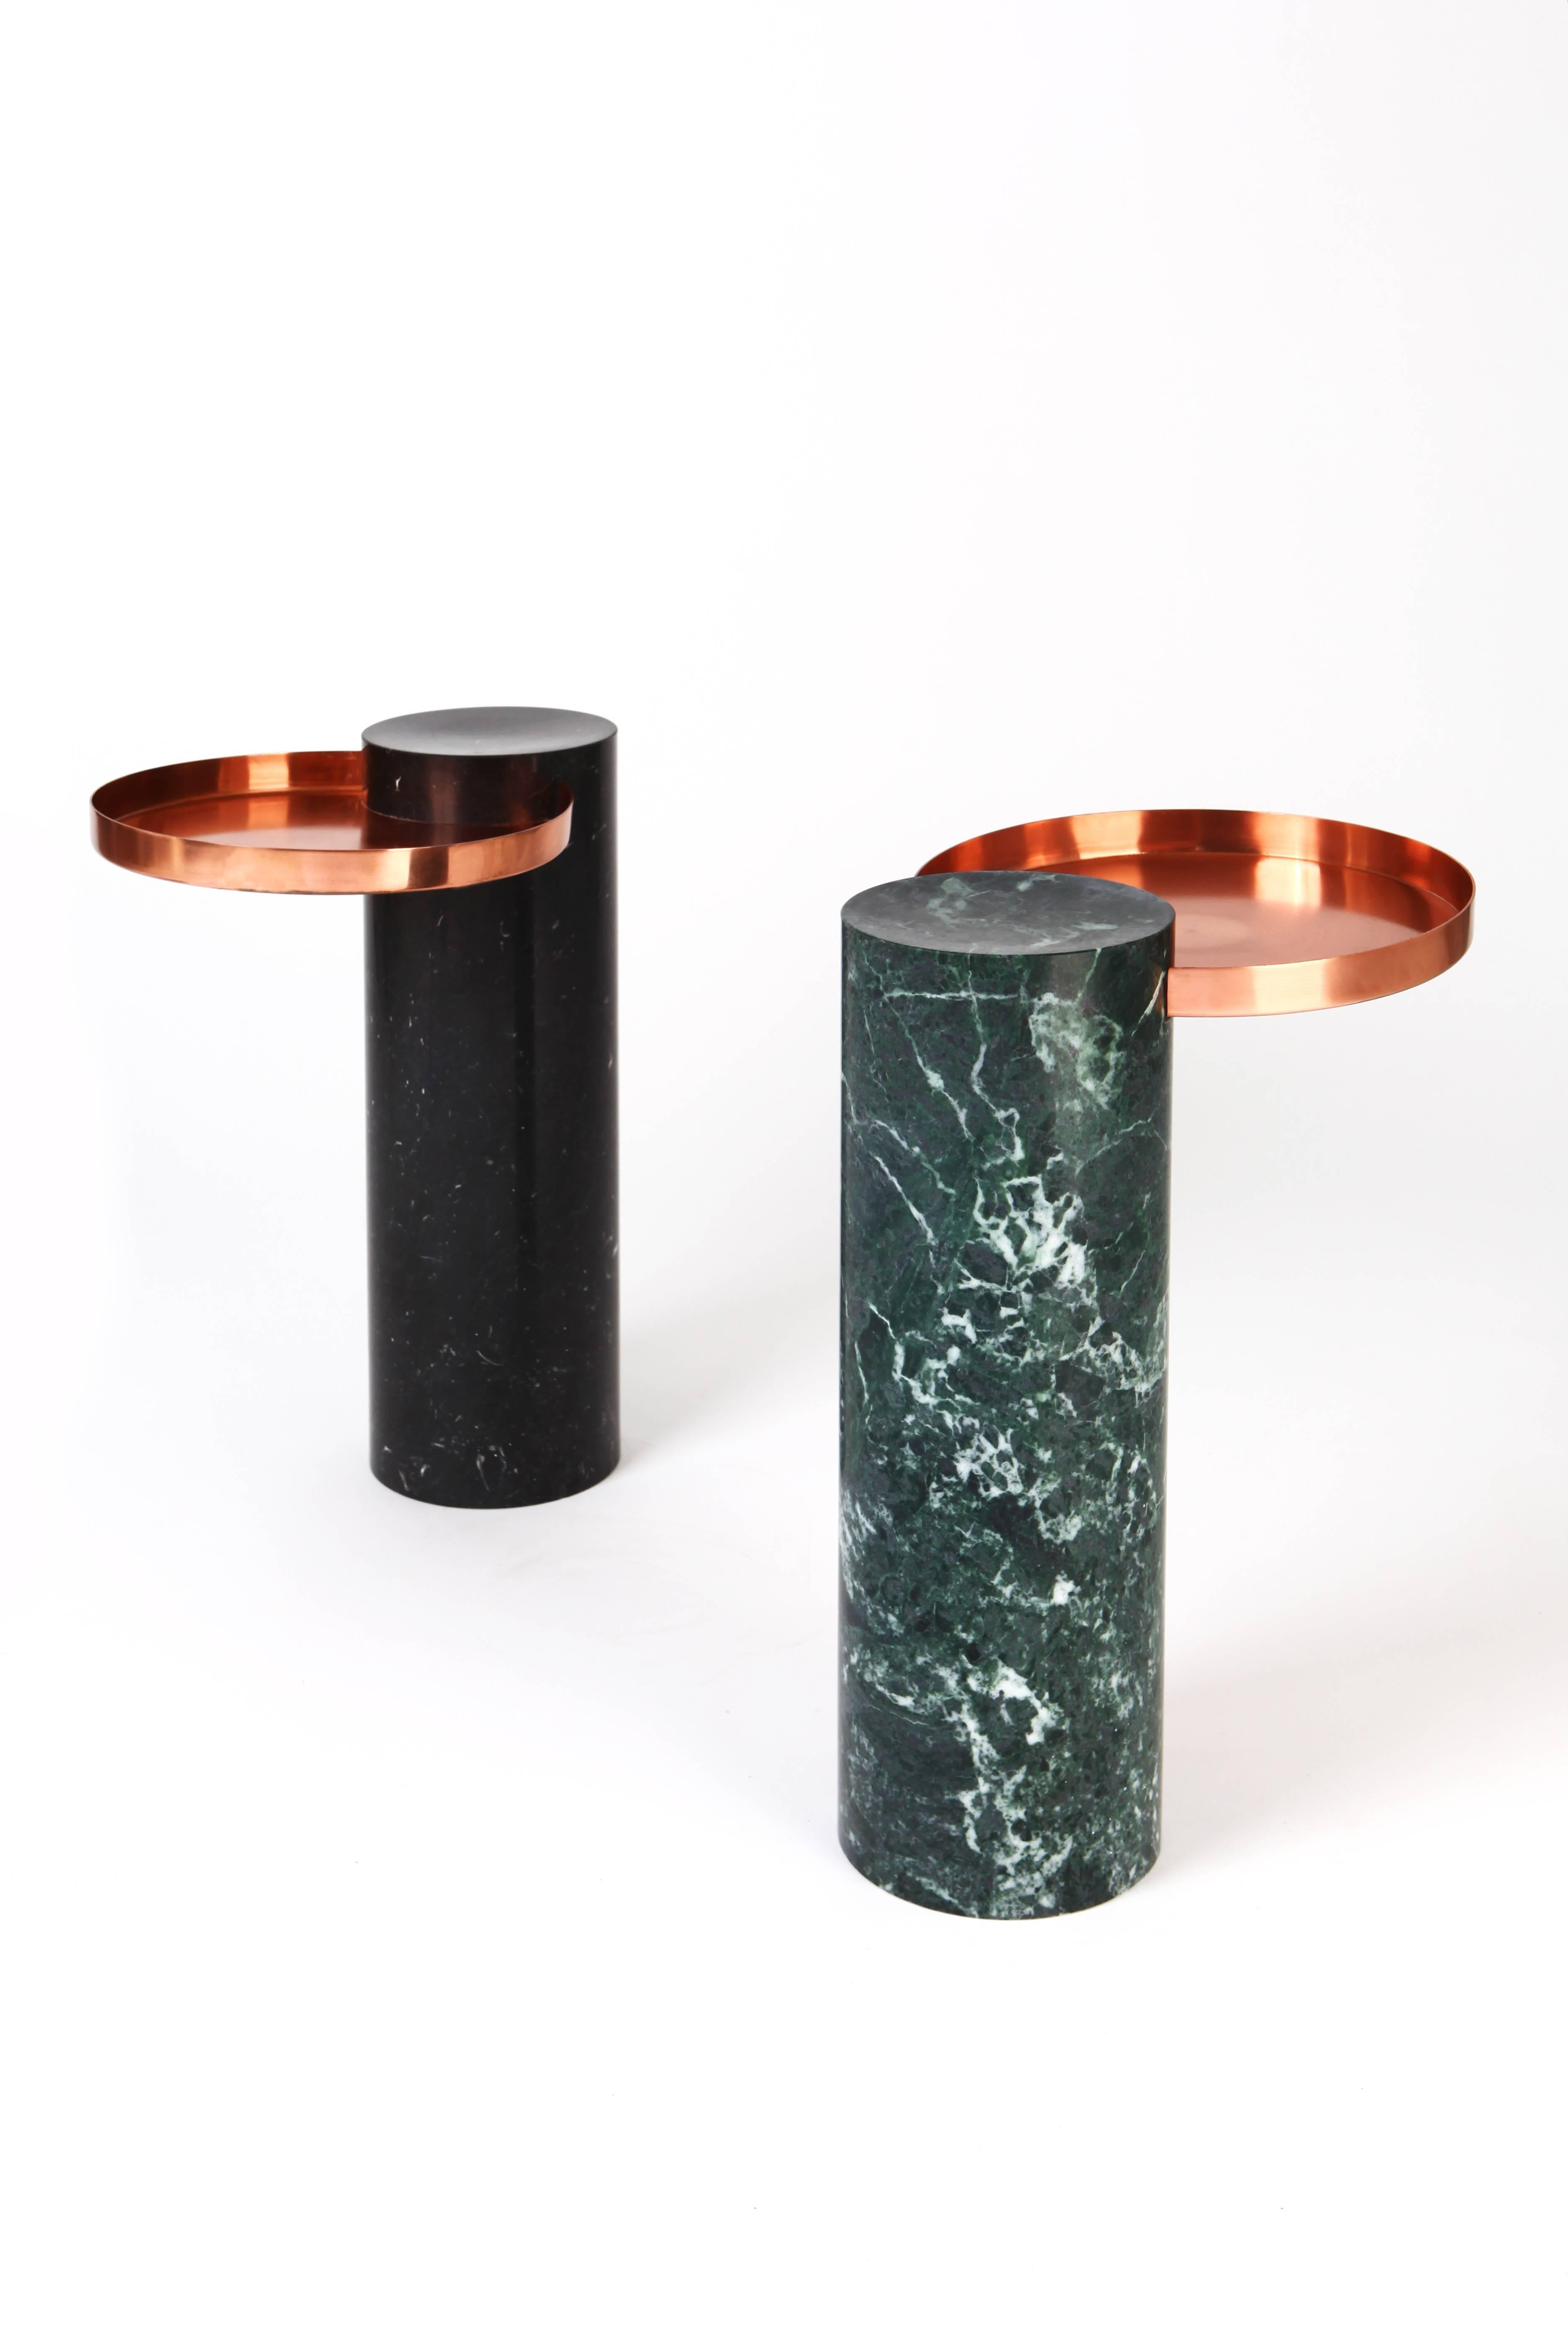 High indian green marble contemporary guéridon, Sebastian Herkner
Dimensions: D 42 x H 57 cm
Materials: Indian green marble, copper

The salute table exists in 3 sizes, 4 different marble stones for the column and 5 different finishes for the